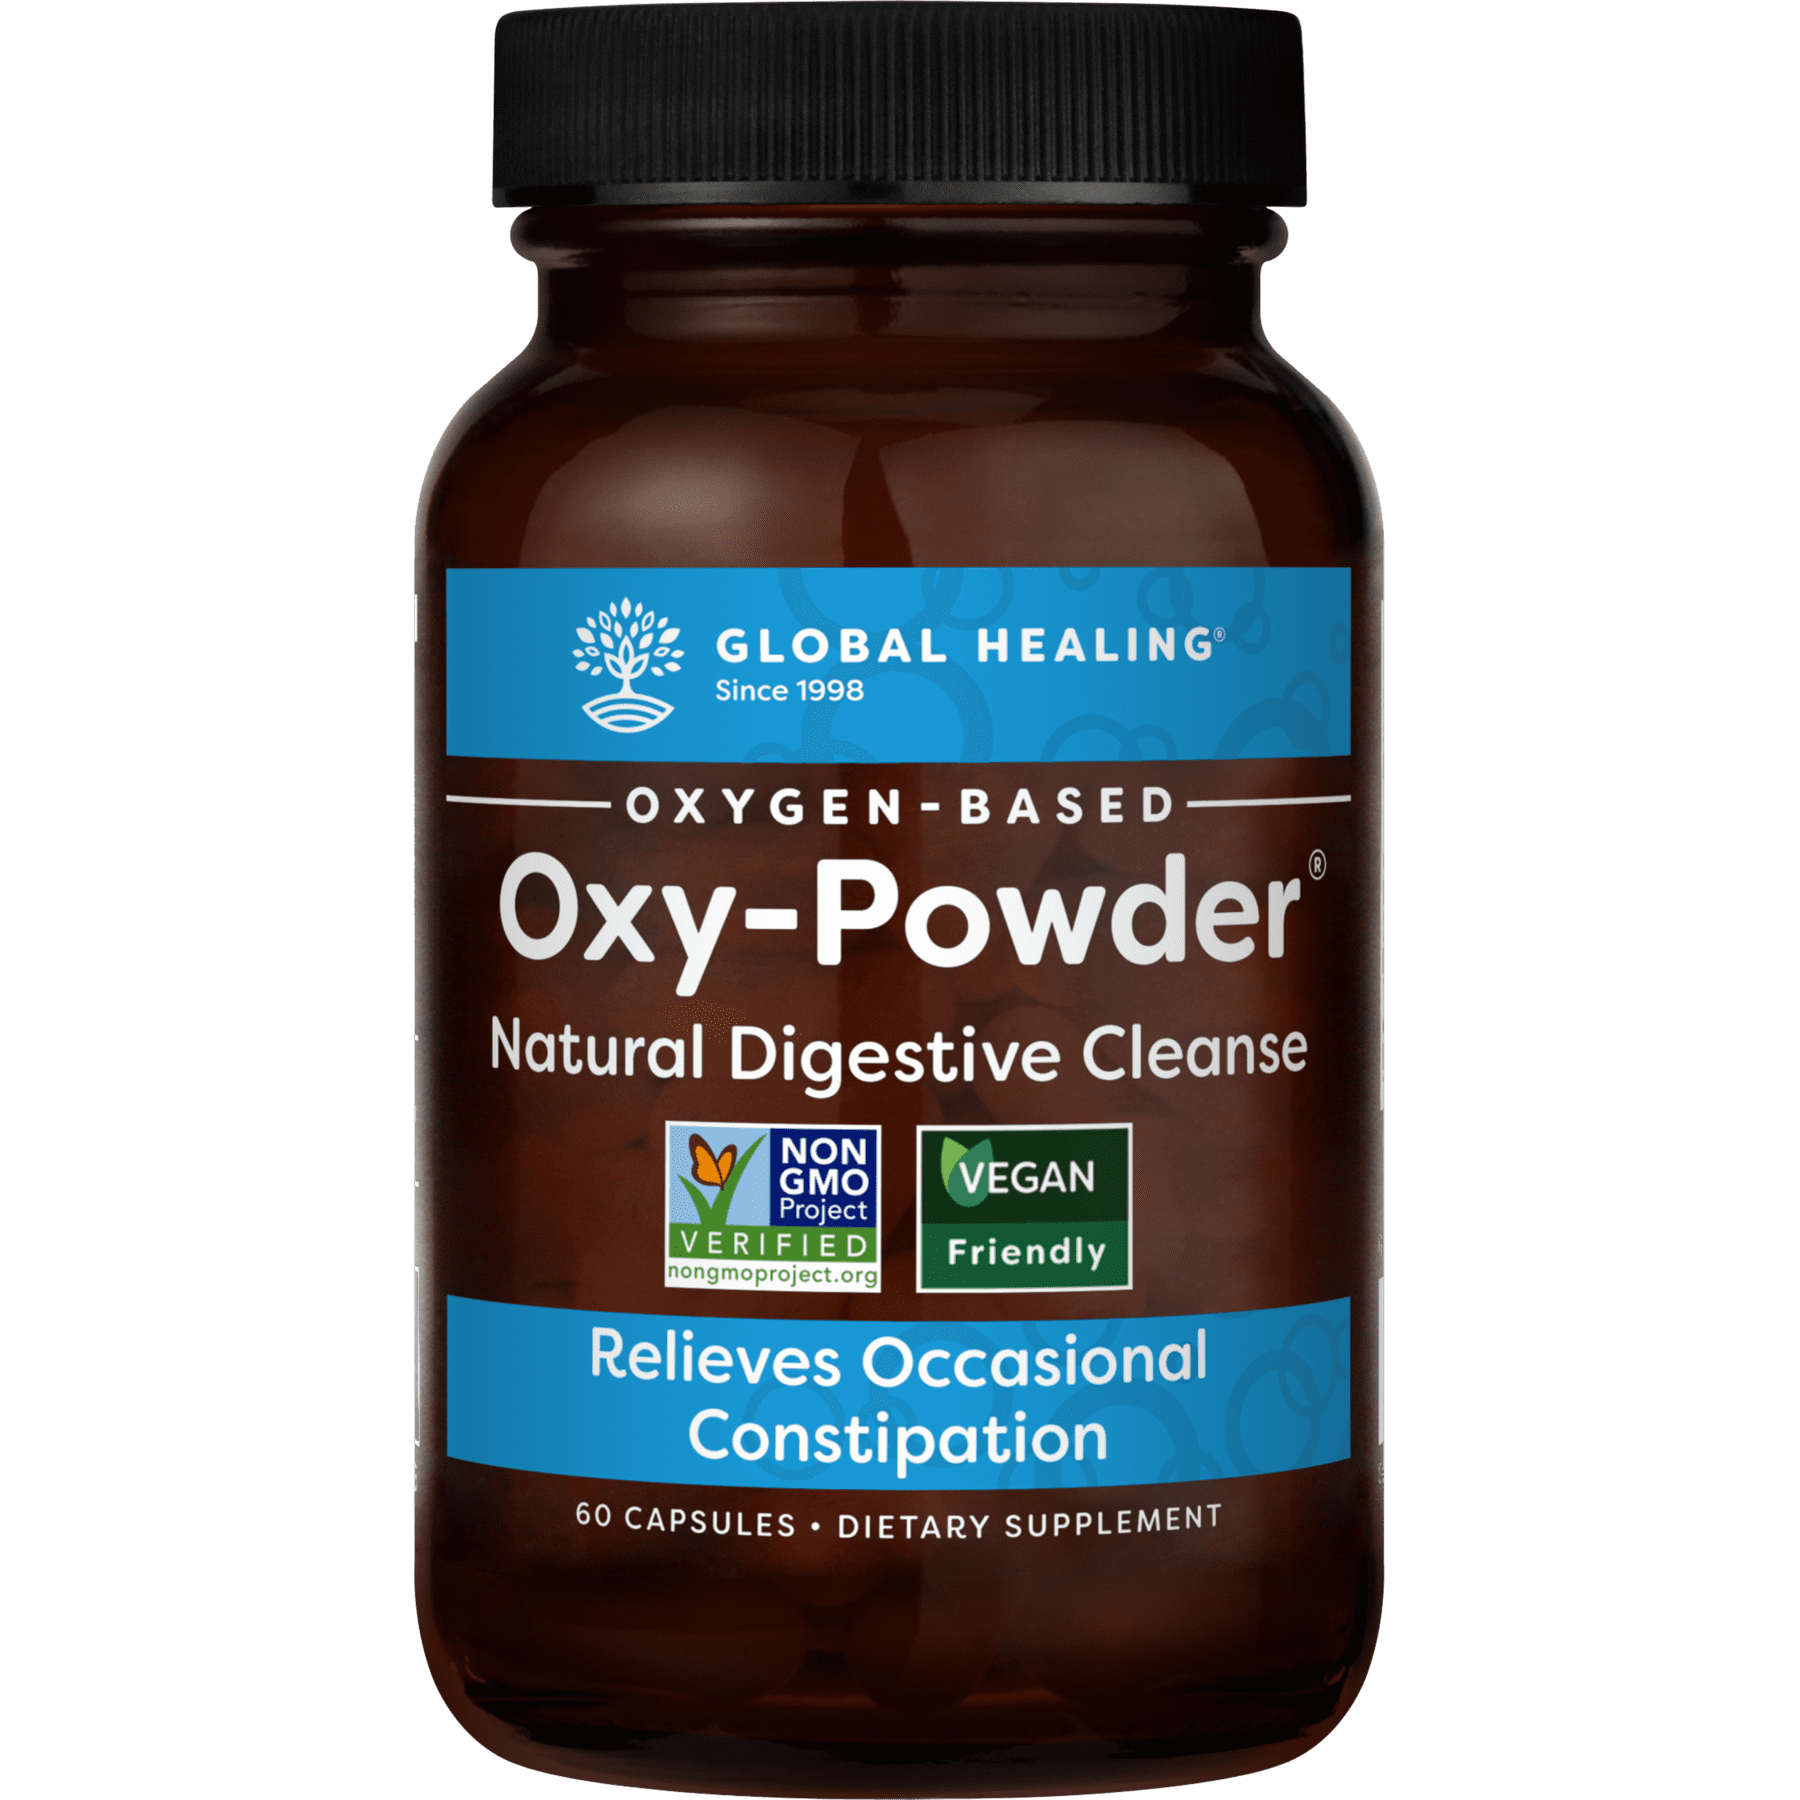 Global Healing Oxy-Powder Colon Cleanse, Pure Detox Magnesium Supplement Pills, 60 Capsules